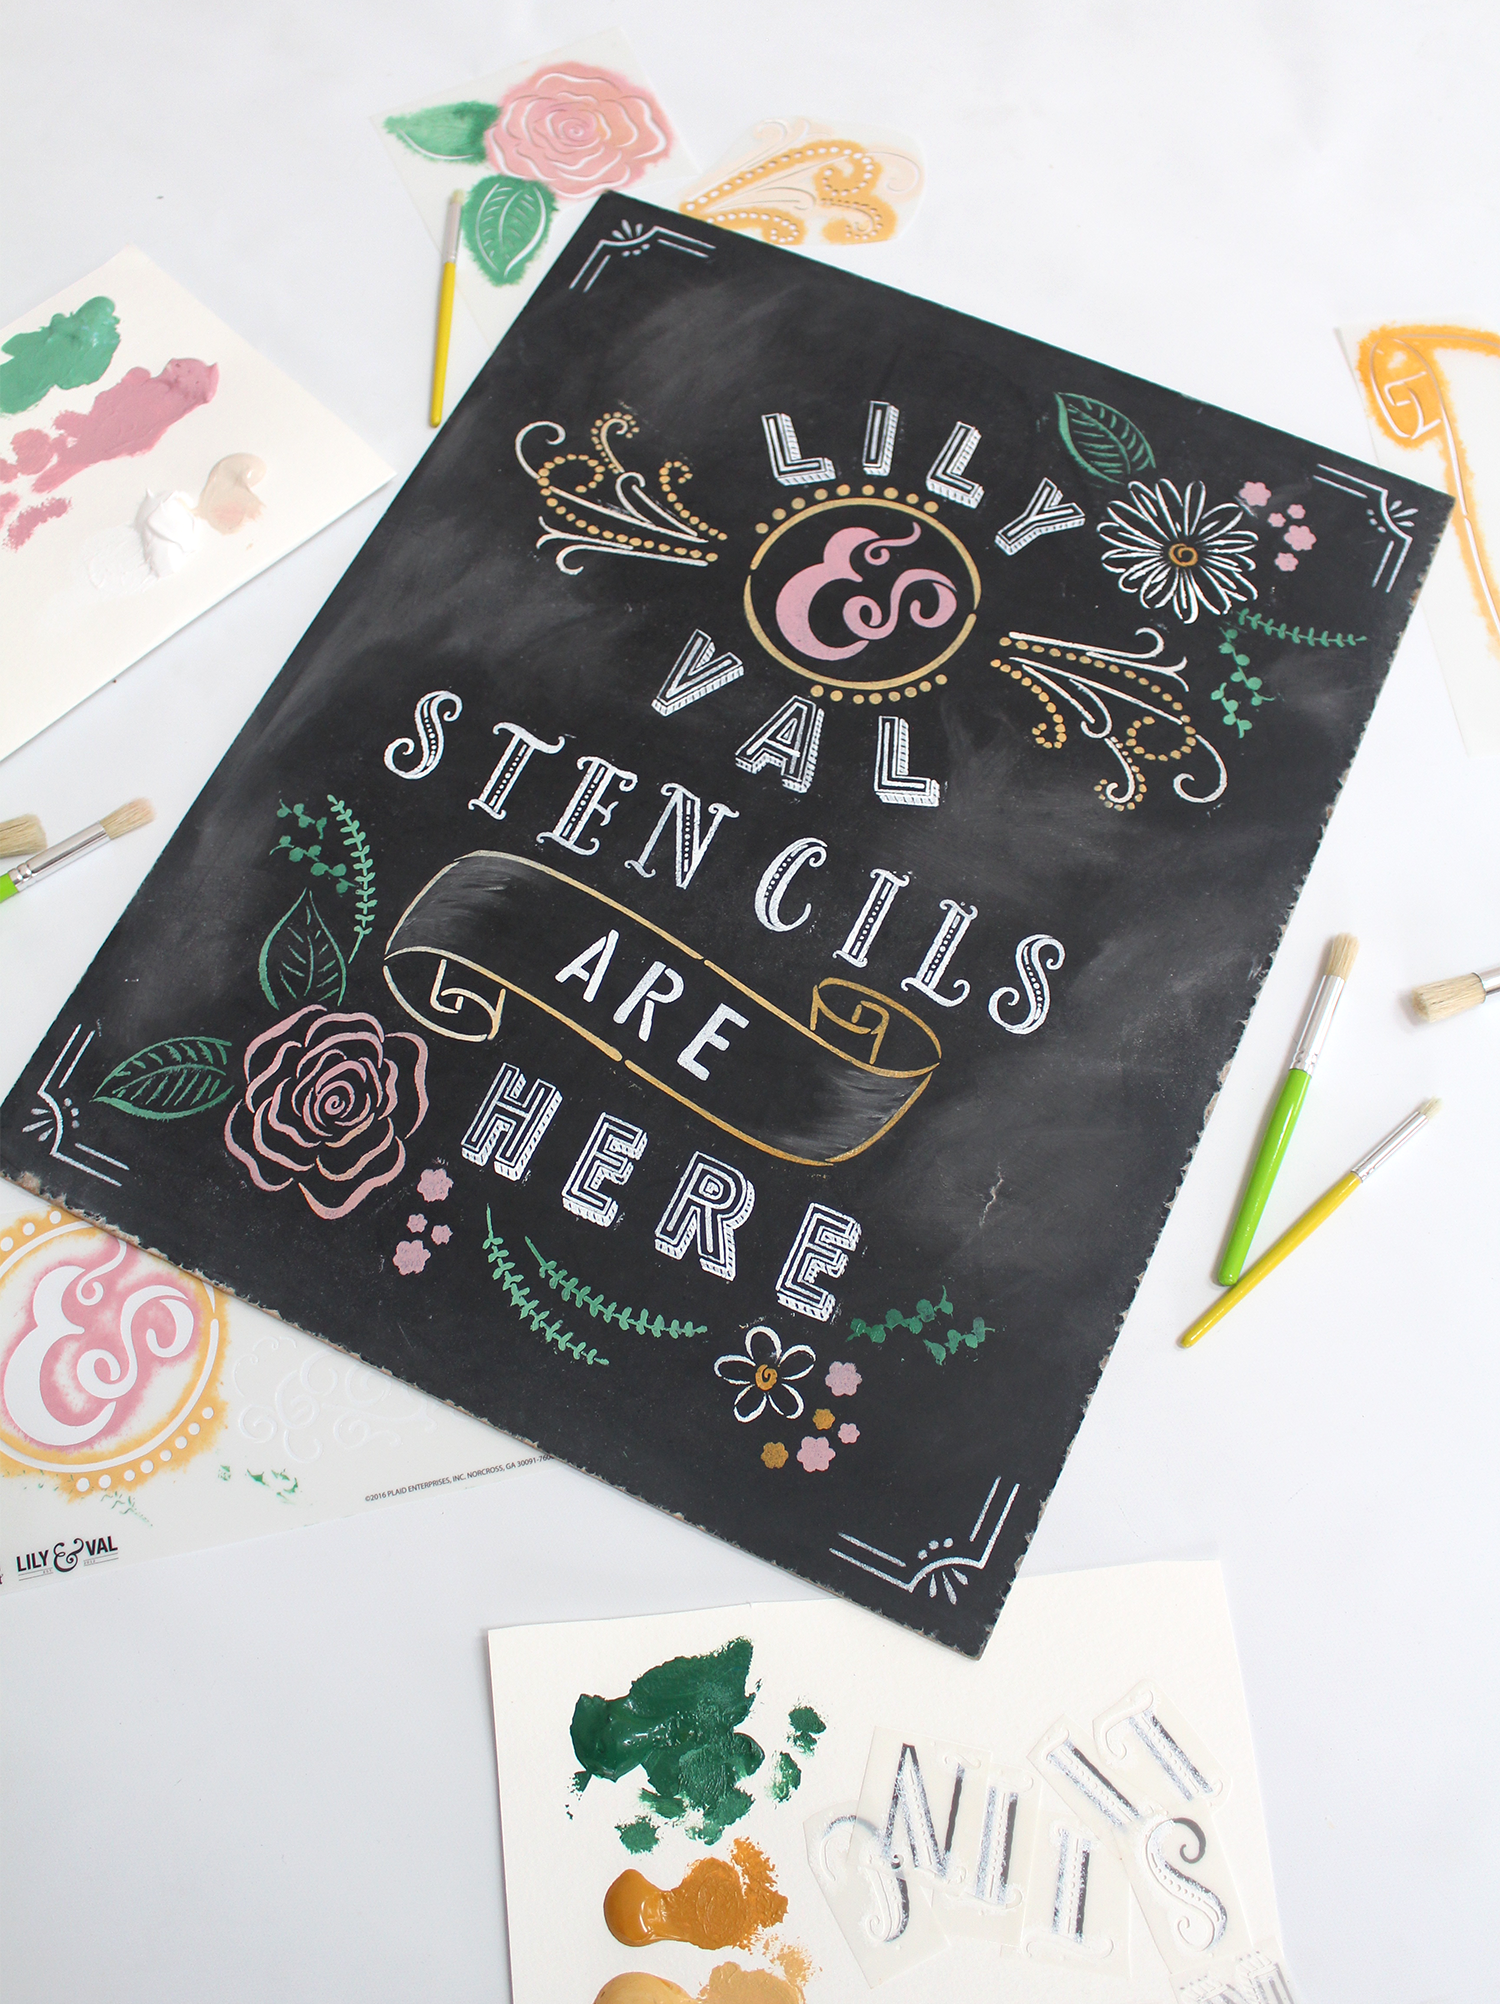 Introducing Lily & Val Chalkboard Lettering Stencils! Create gorgeous pieces of chalkboard art featuring Valerie McKeehan's signature hand lettering and embellishments. Available from Plaid Crafts at Michaels!